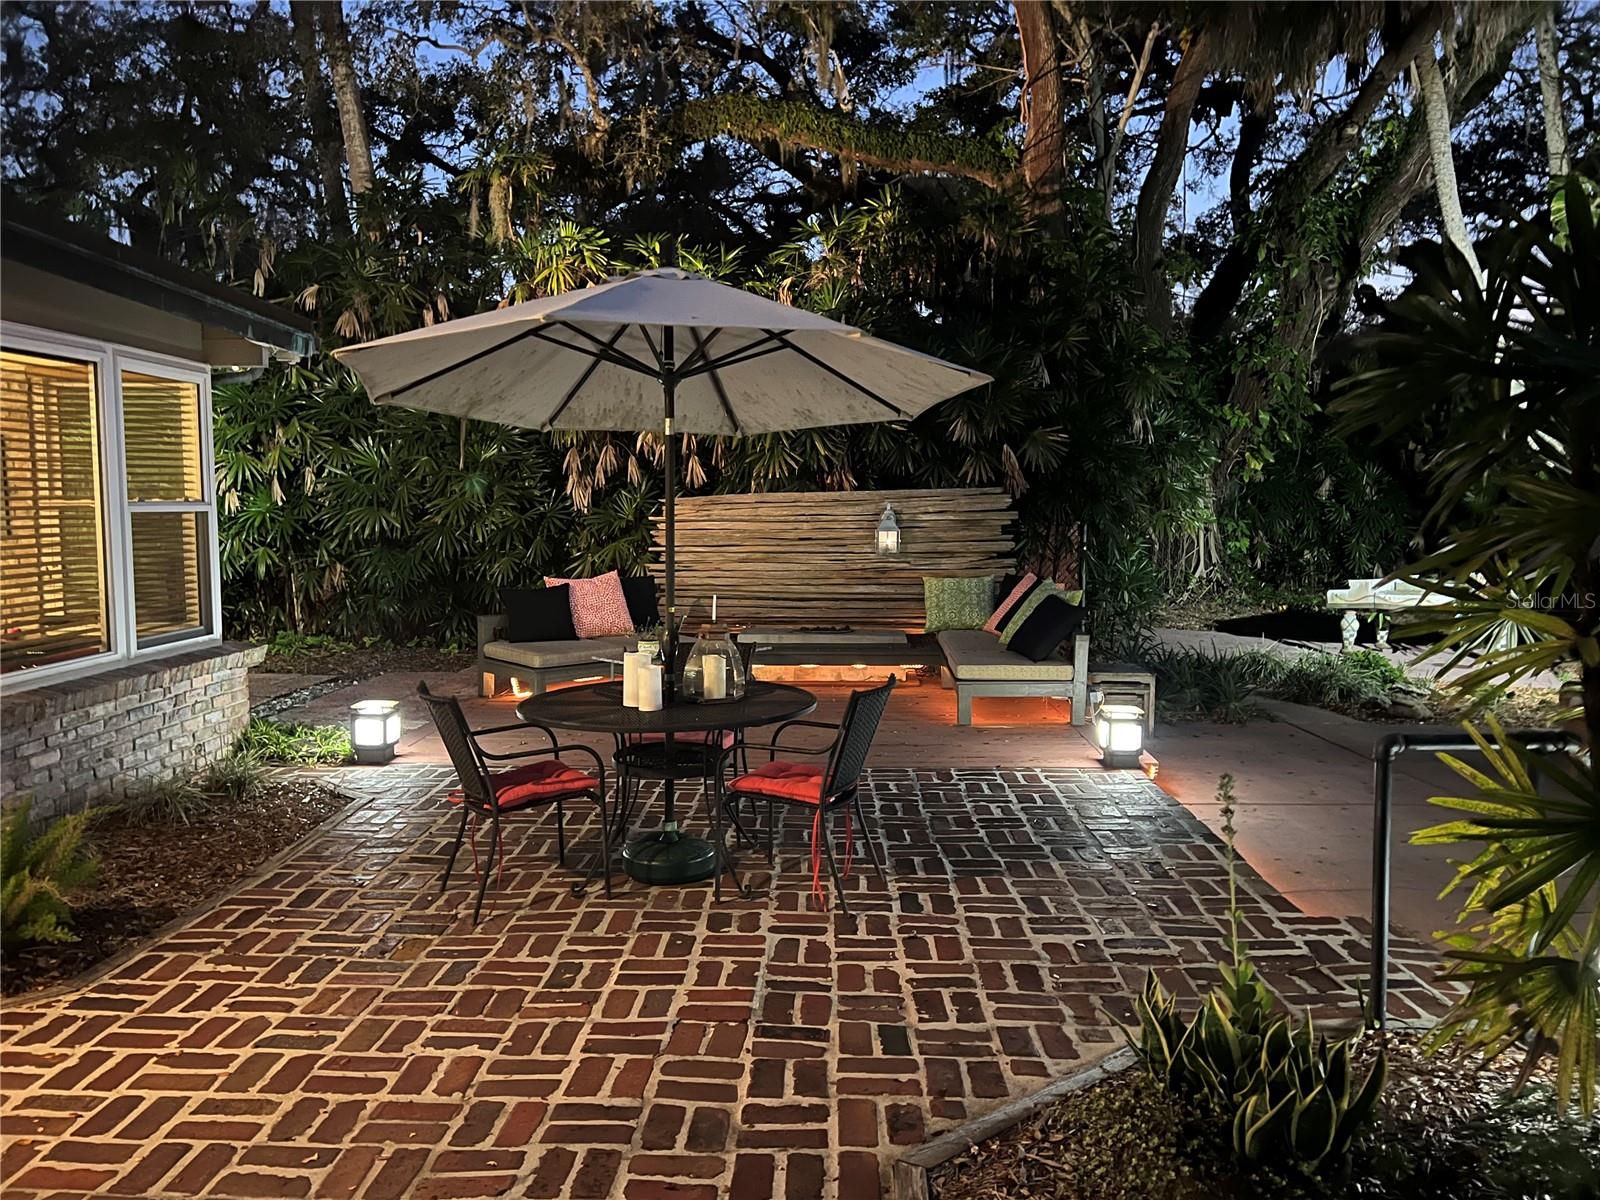 Night view of back yard, private patio